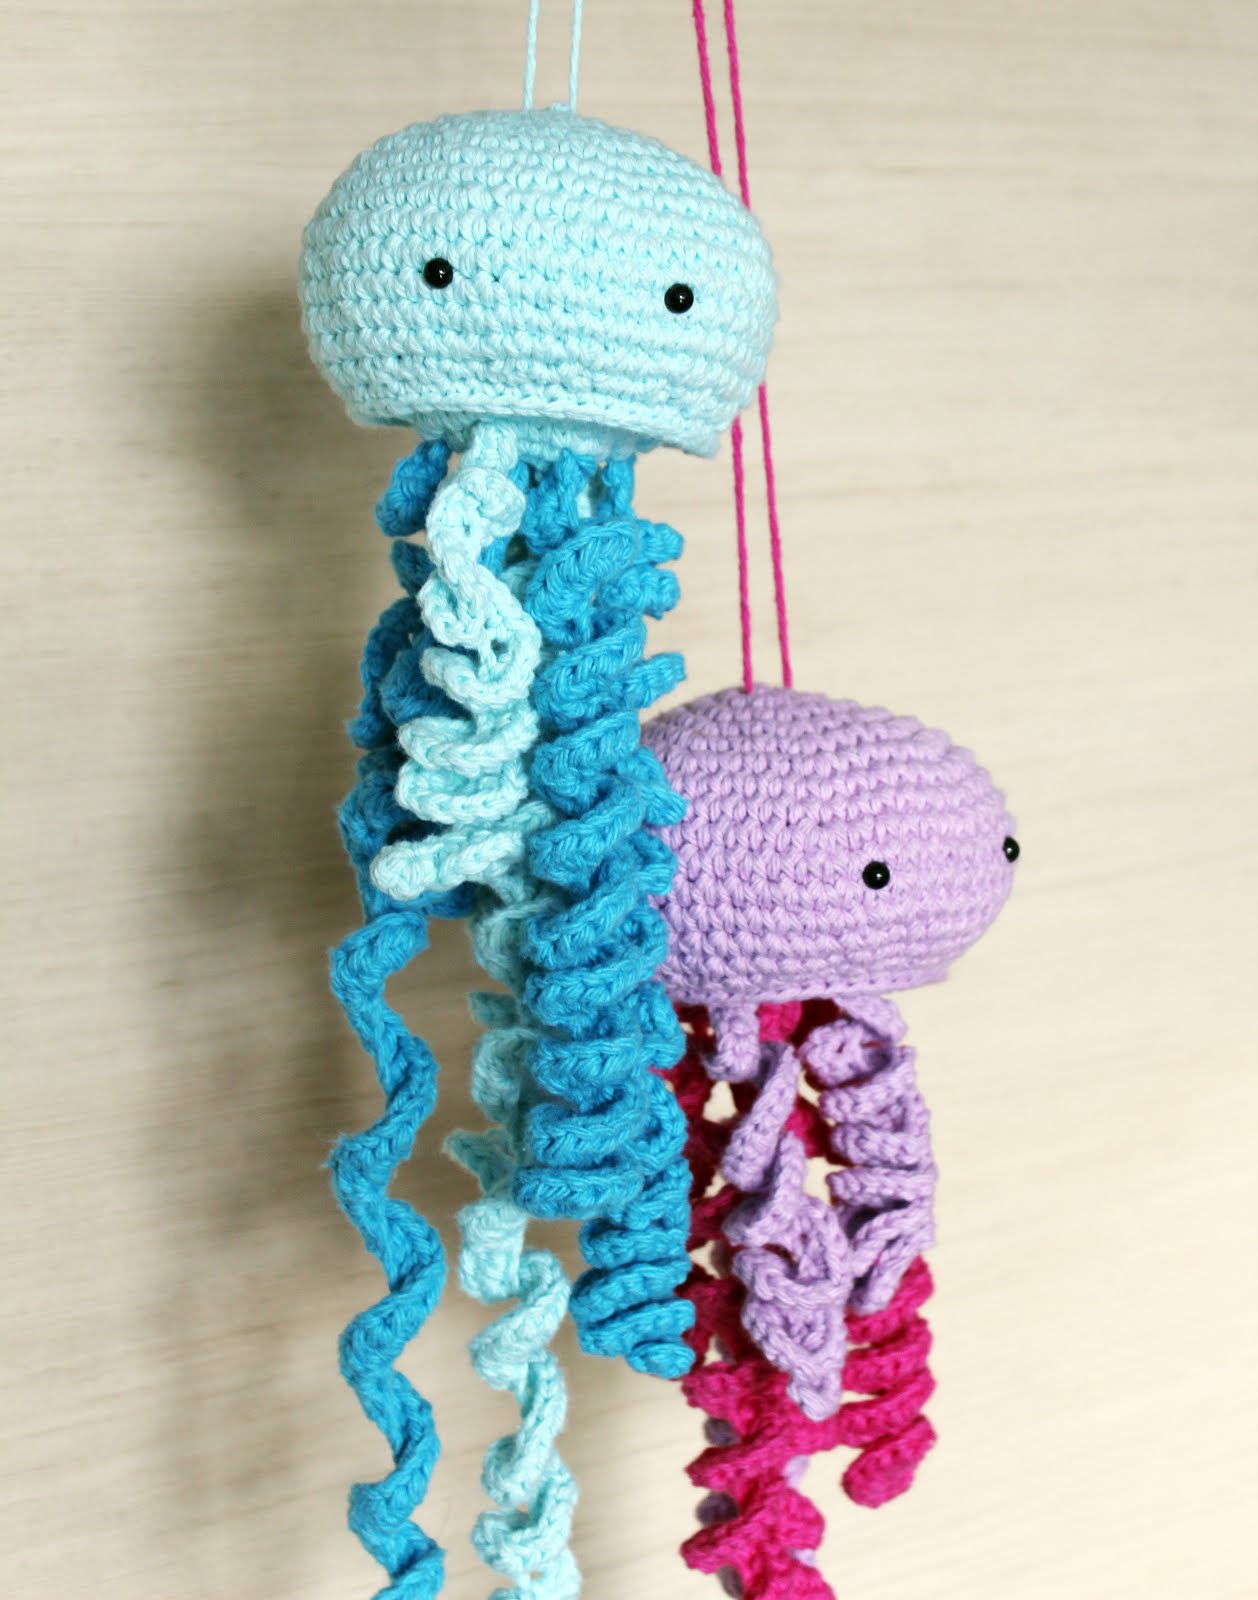 Crochet Jellyfish - Once Upon a Cheerio